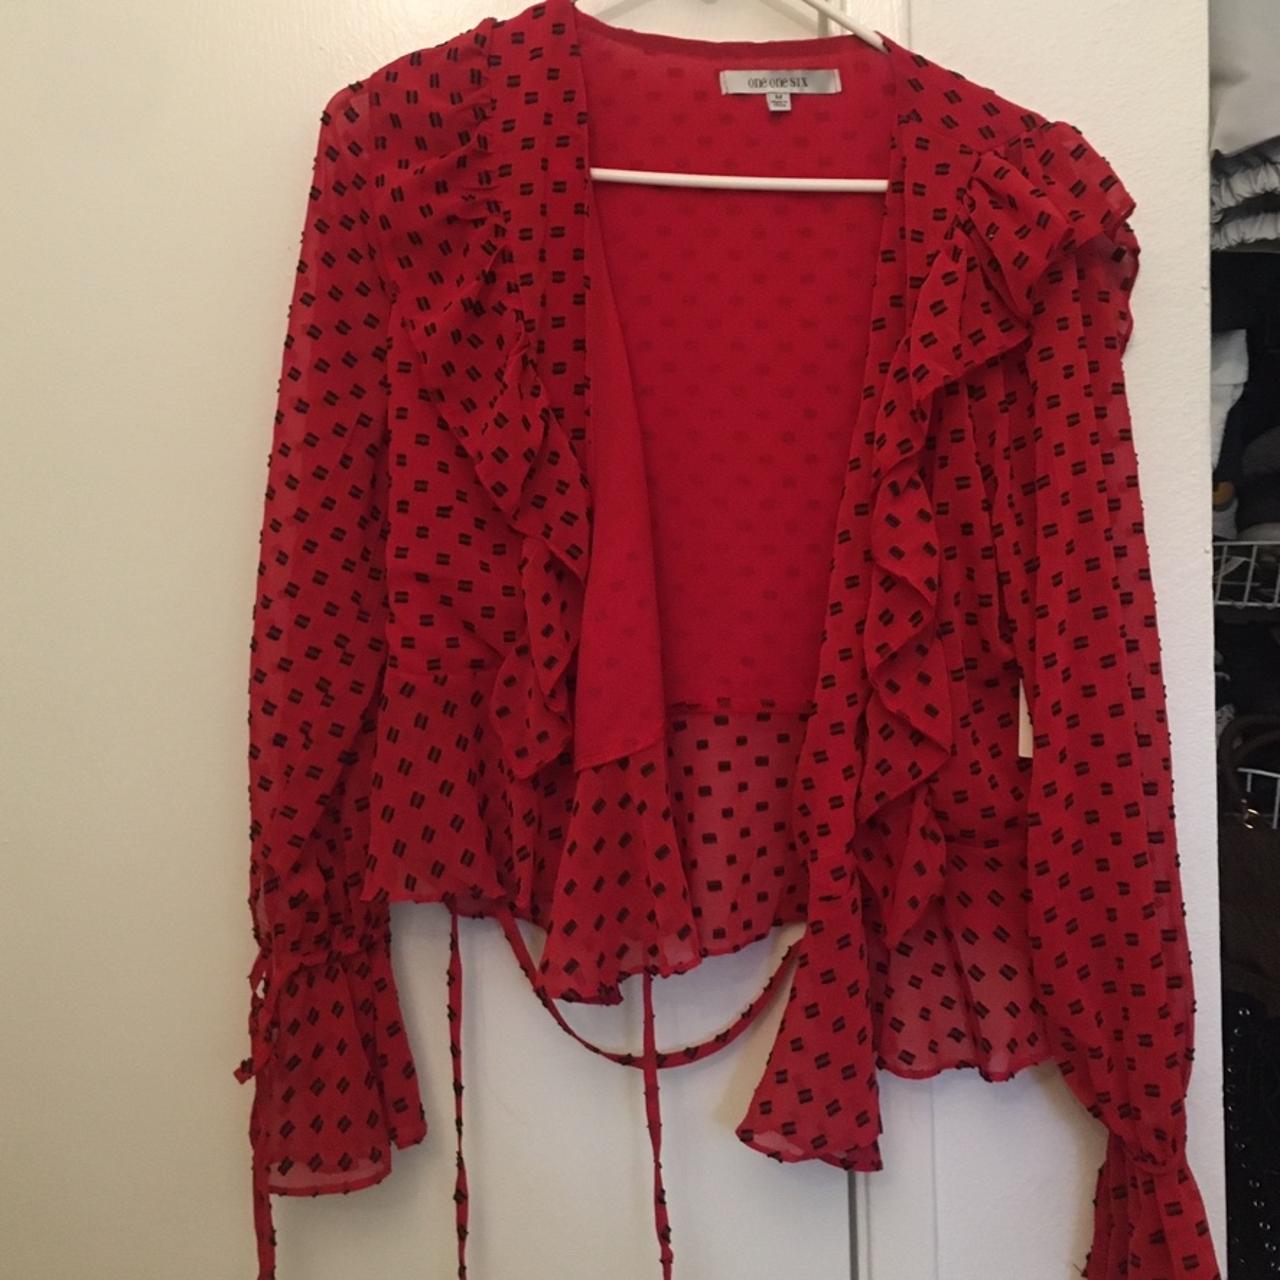 Product Image 2 - Beautiful red blouse

Brand new with